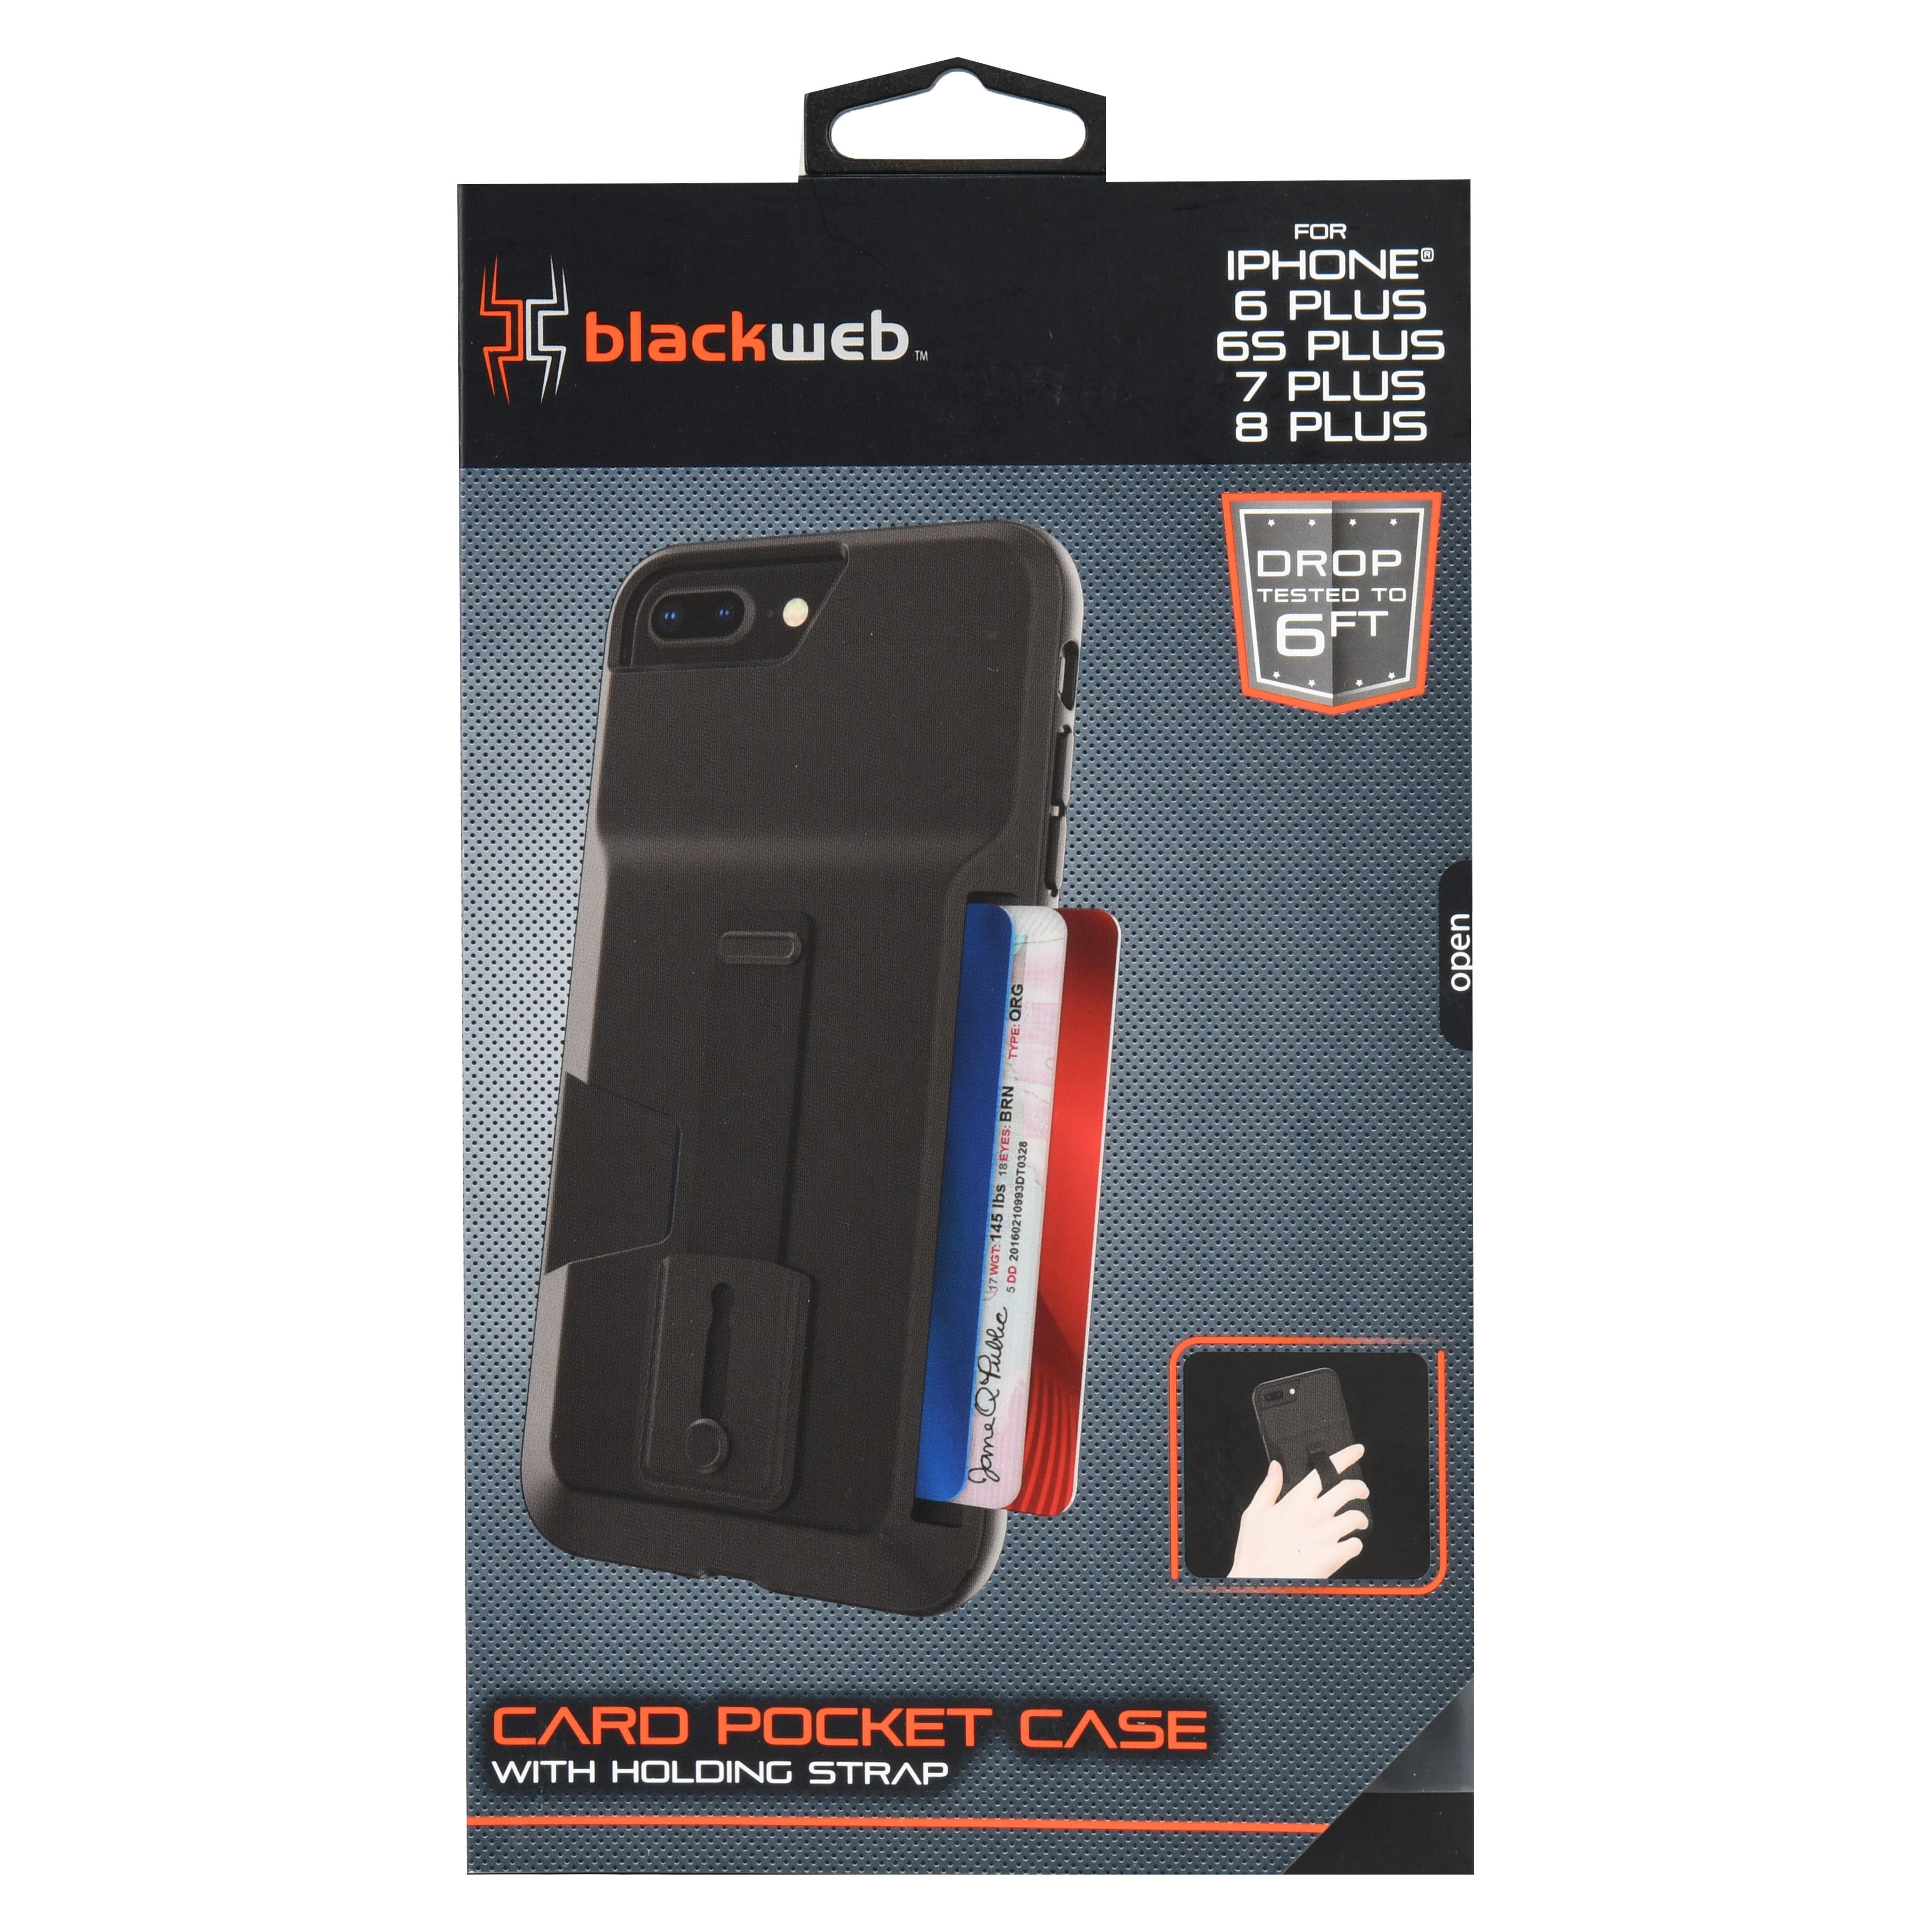 Blackweb Card Pocket Case with Holding Strap and Kickstand for iPhone 6